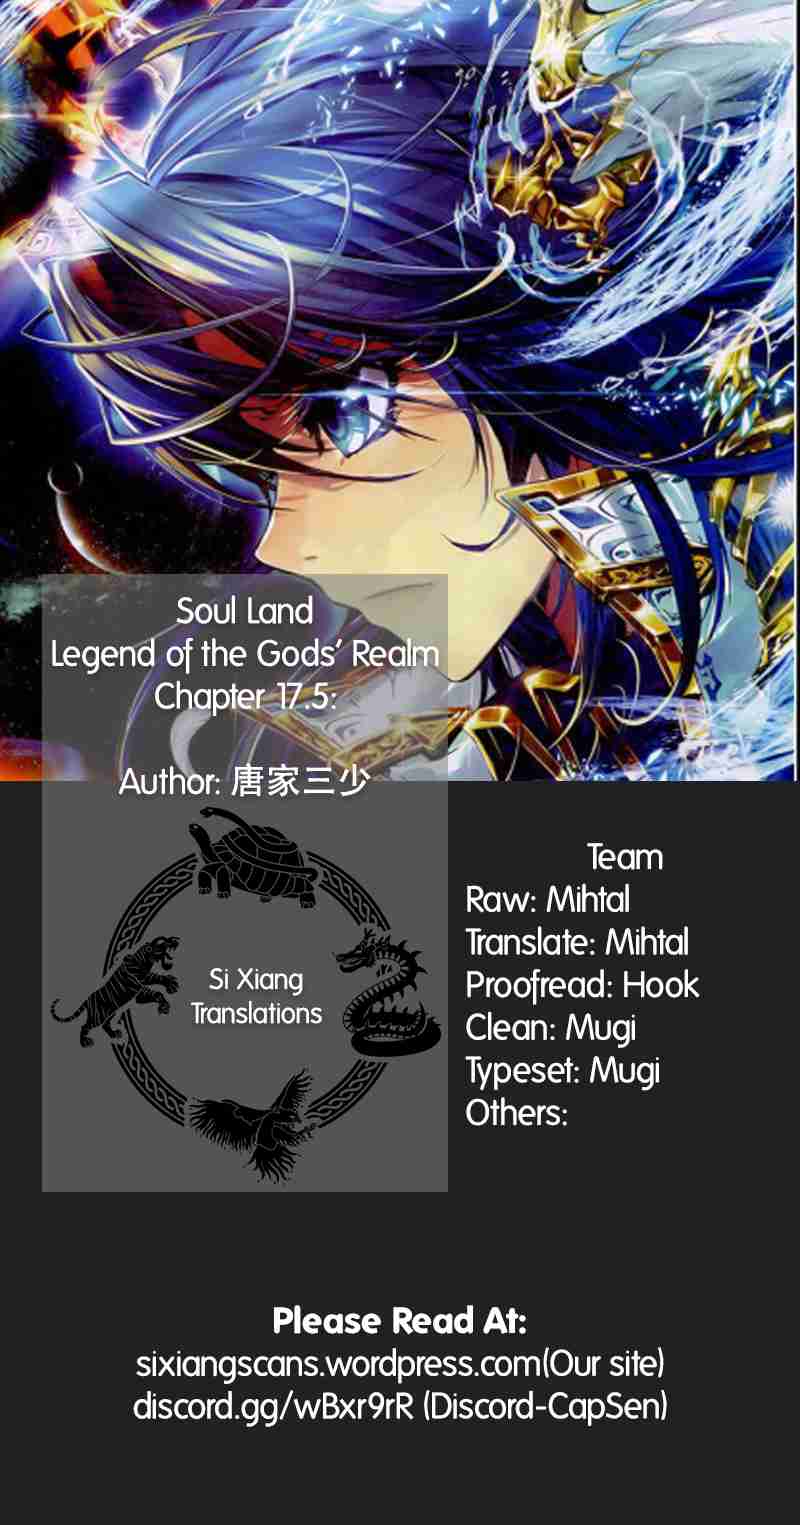 Soul Land Legend of The Gods' Realm Ch. 29 (Chapter 17.5)